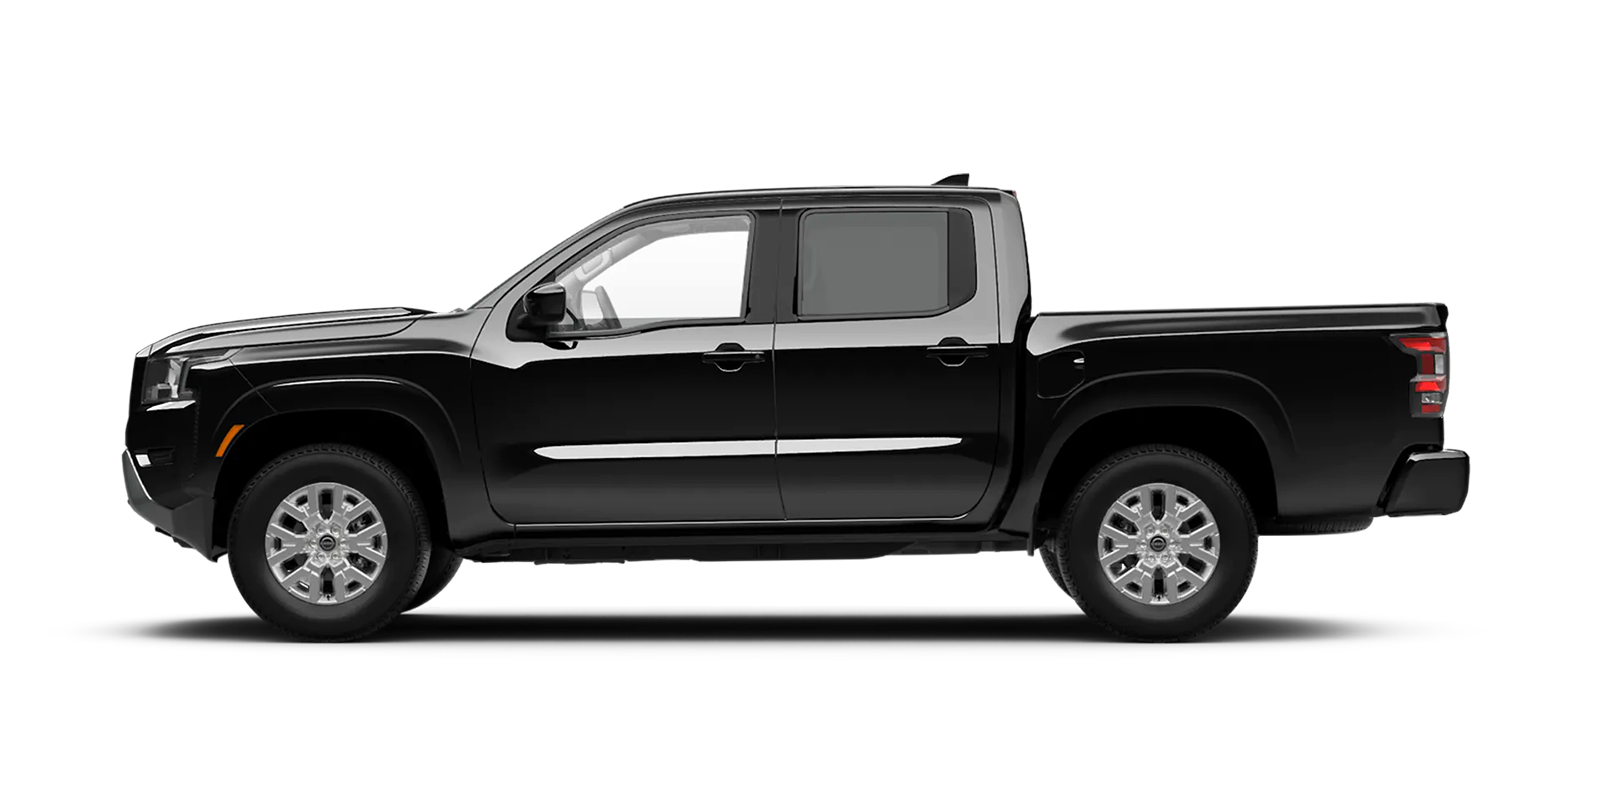 2022 Frontier Crew Cab SV 4x4 in Super Black | Nationwide Nissan in Timonium MD